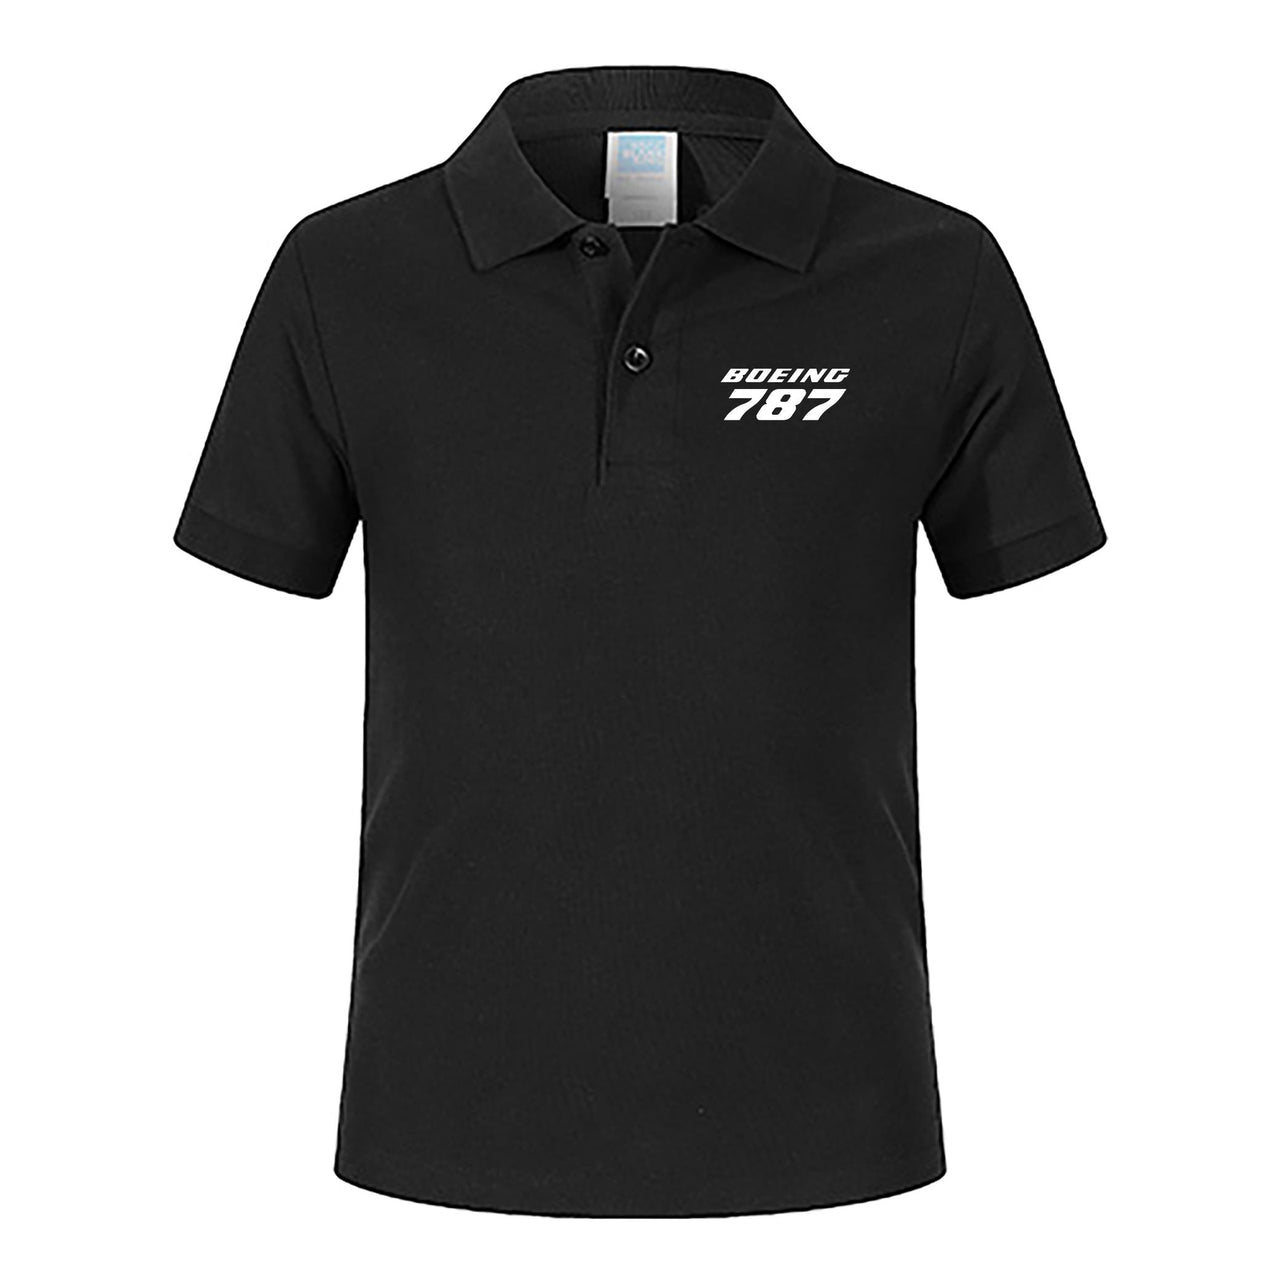 Boeing 787 & Text Designed Children Polo T-Shirts